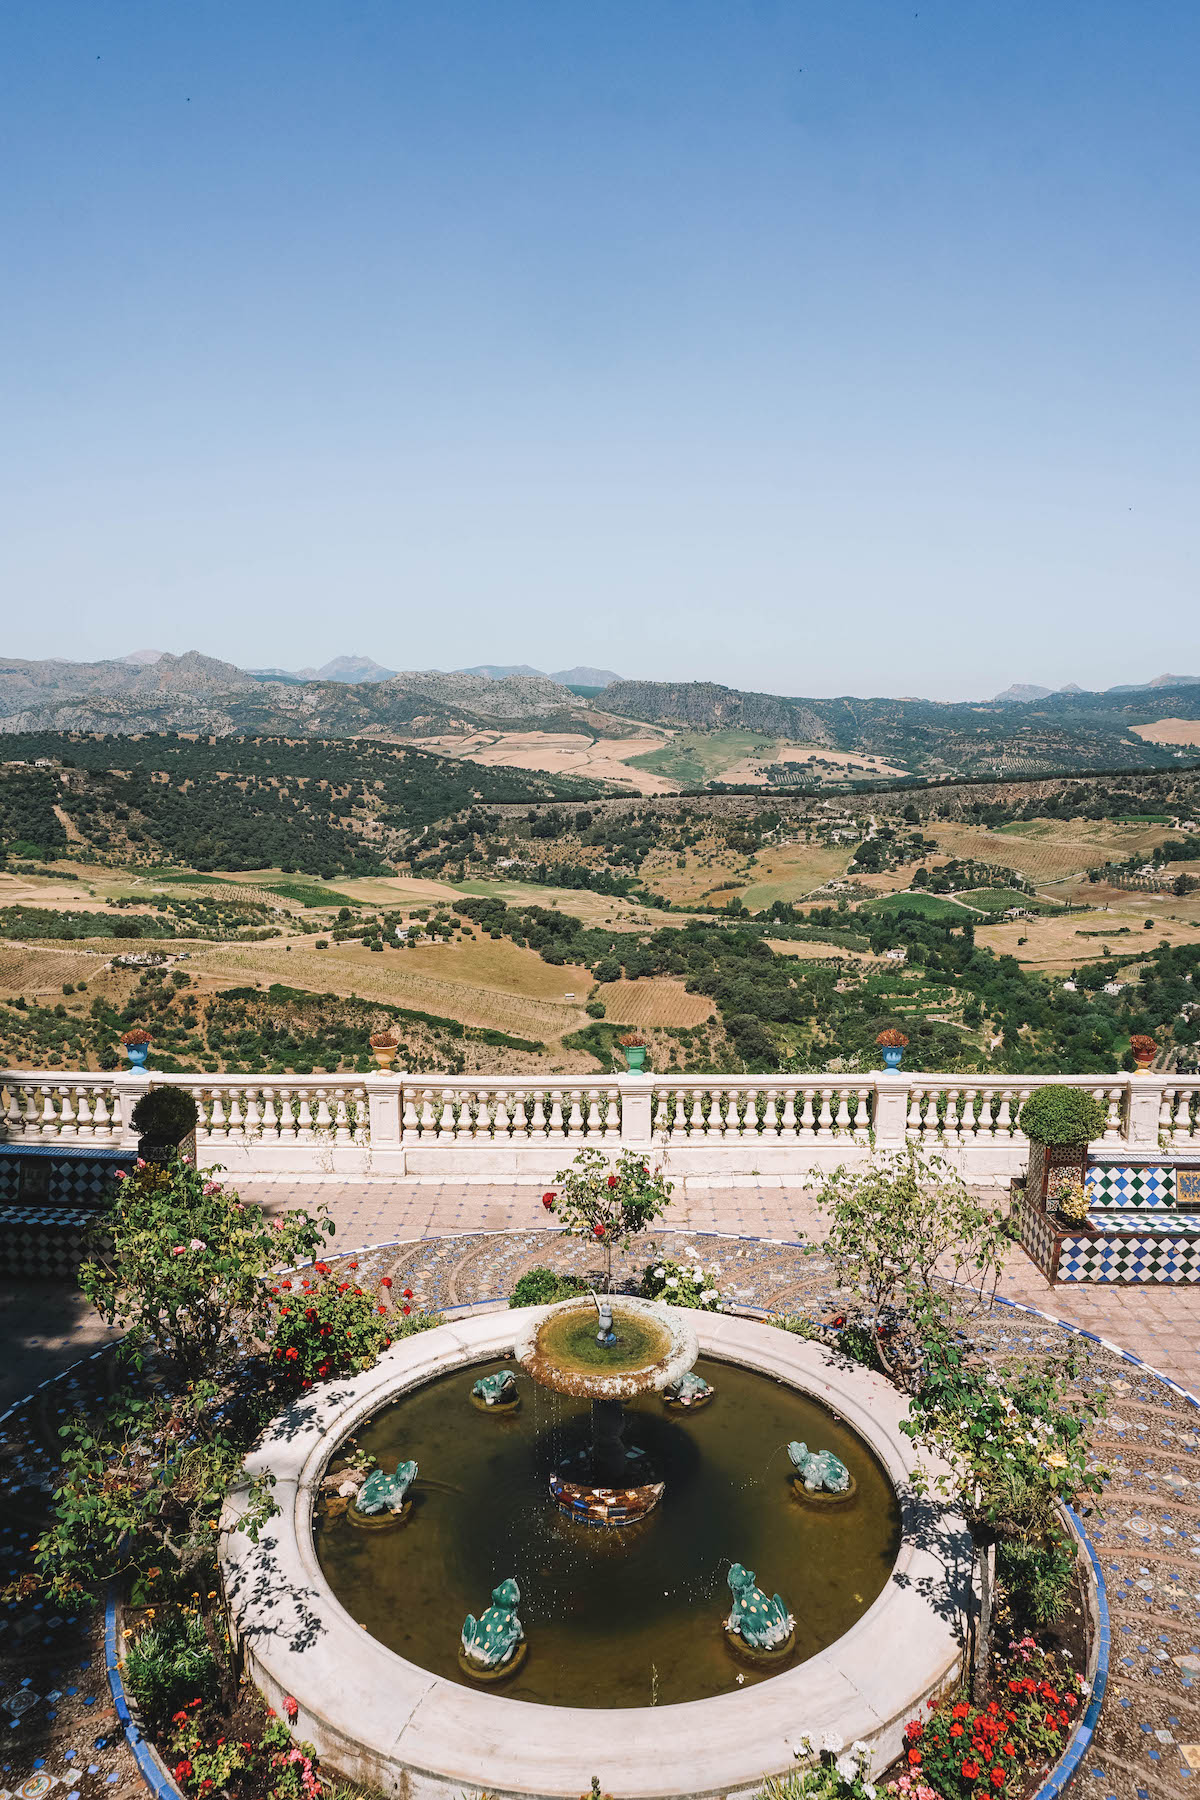 The gardens and far reaching view from the Don Bosco House in Ronda, Spain.